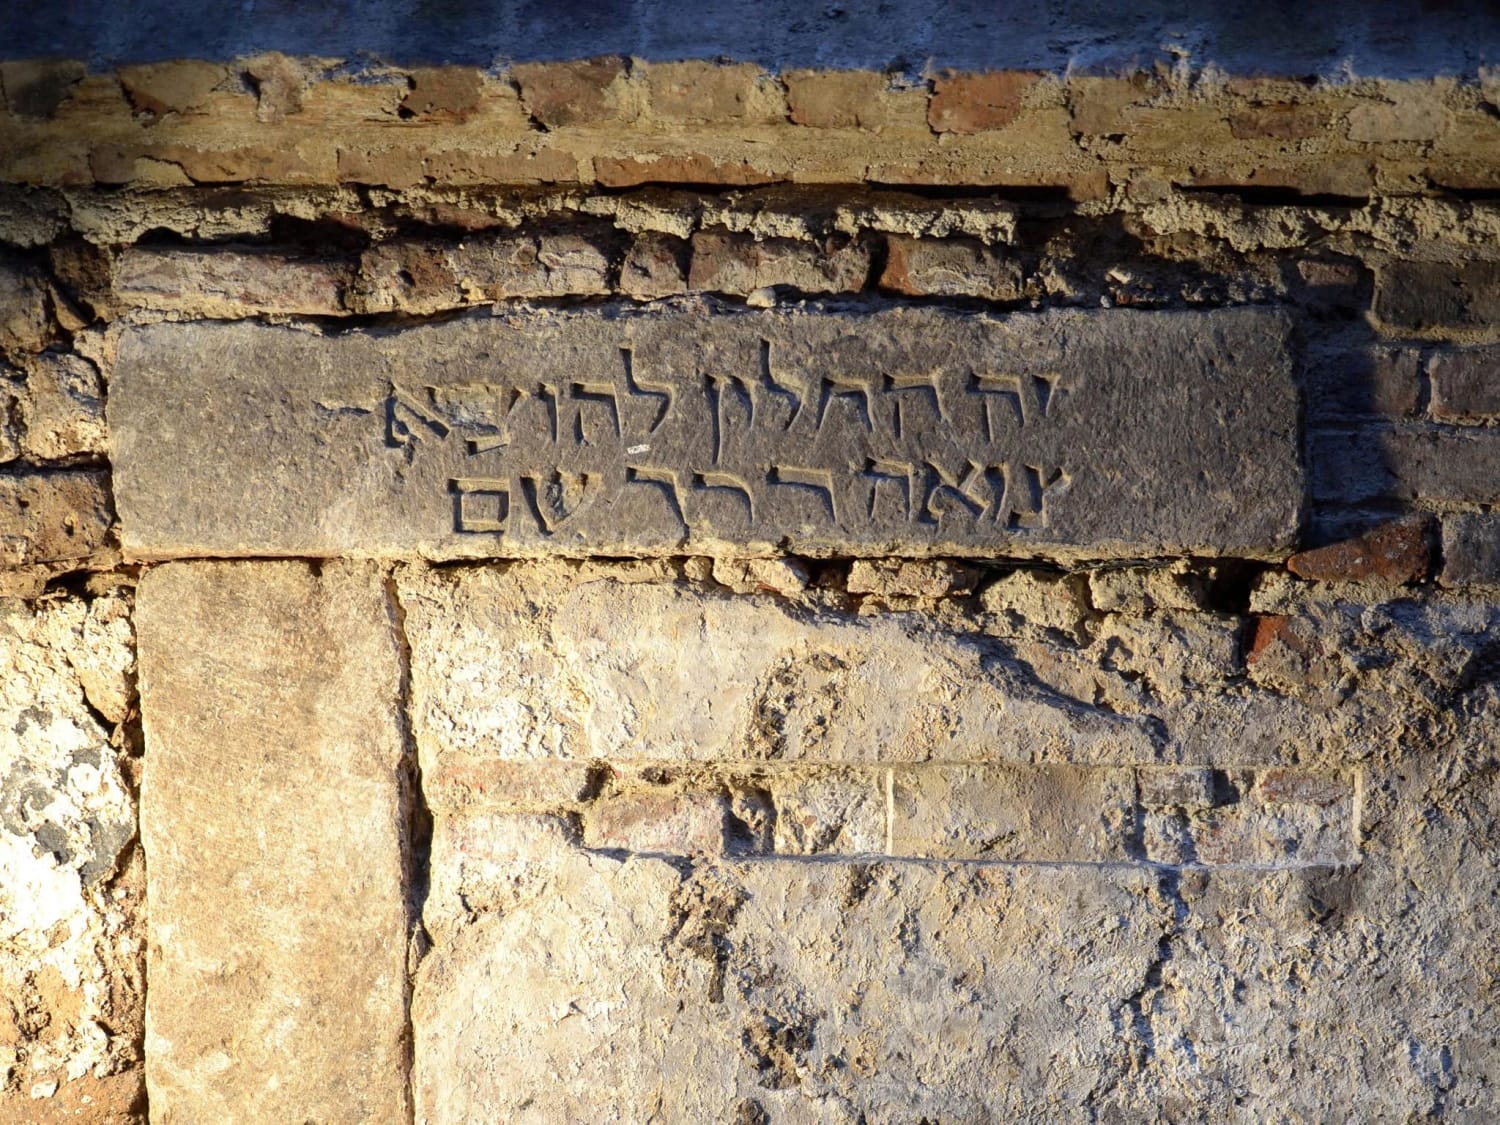 A strange Hebrew inscription from 13th century Cologne, Germany, reading "this is the window through which excrement is taken out". It apparently indicated the opening to a cesspit.